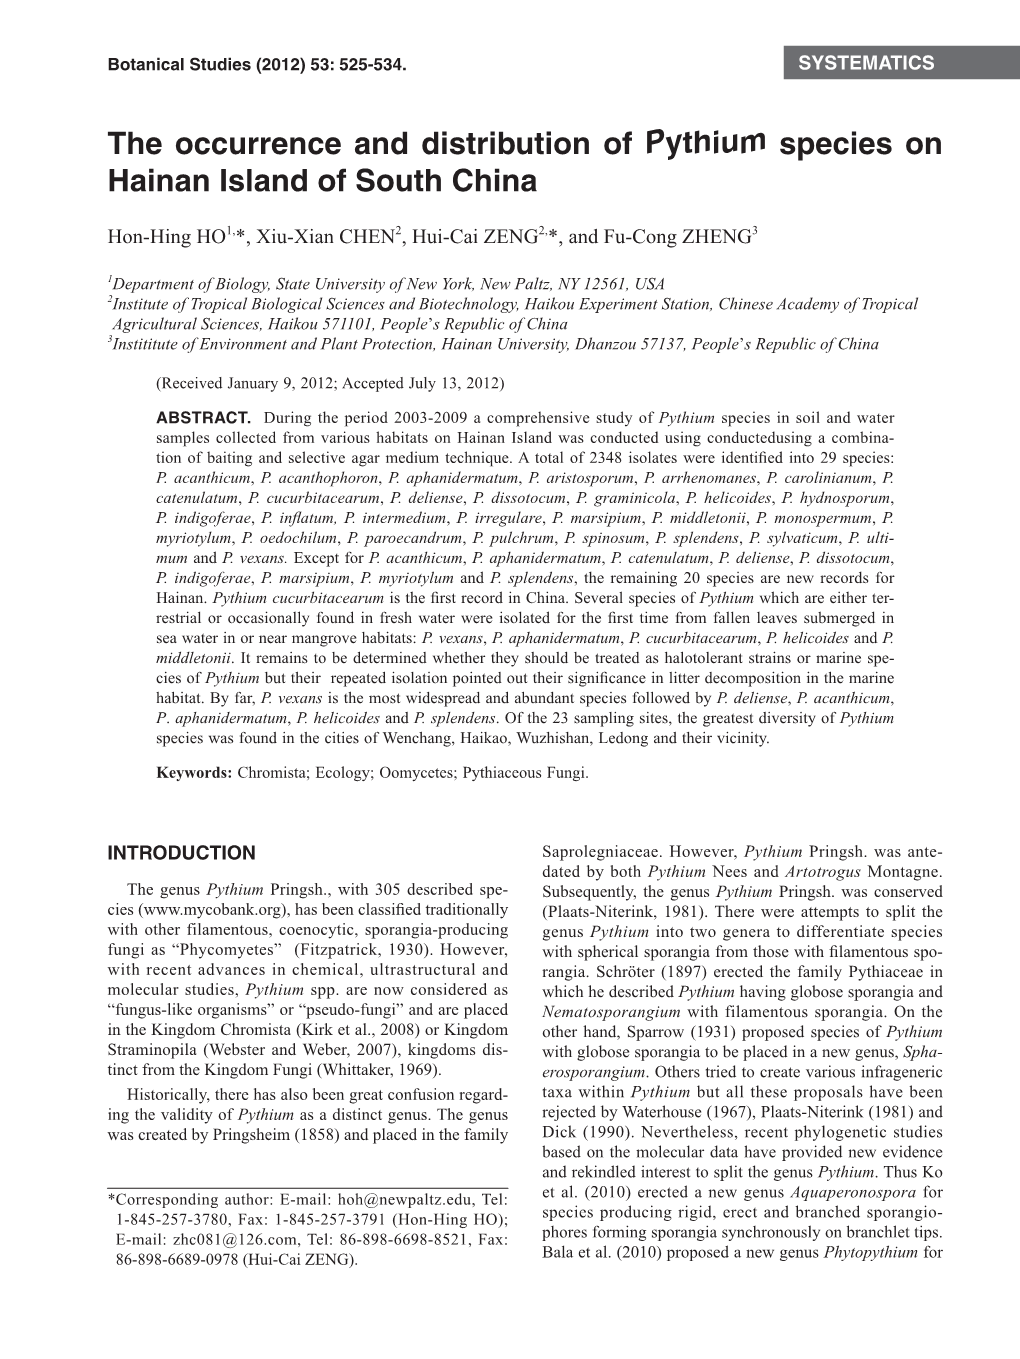 The Occurrence and Distribution of Pythium Species on Hainan Island of South China